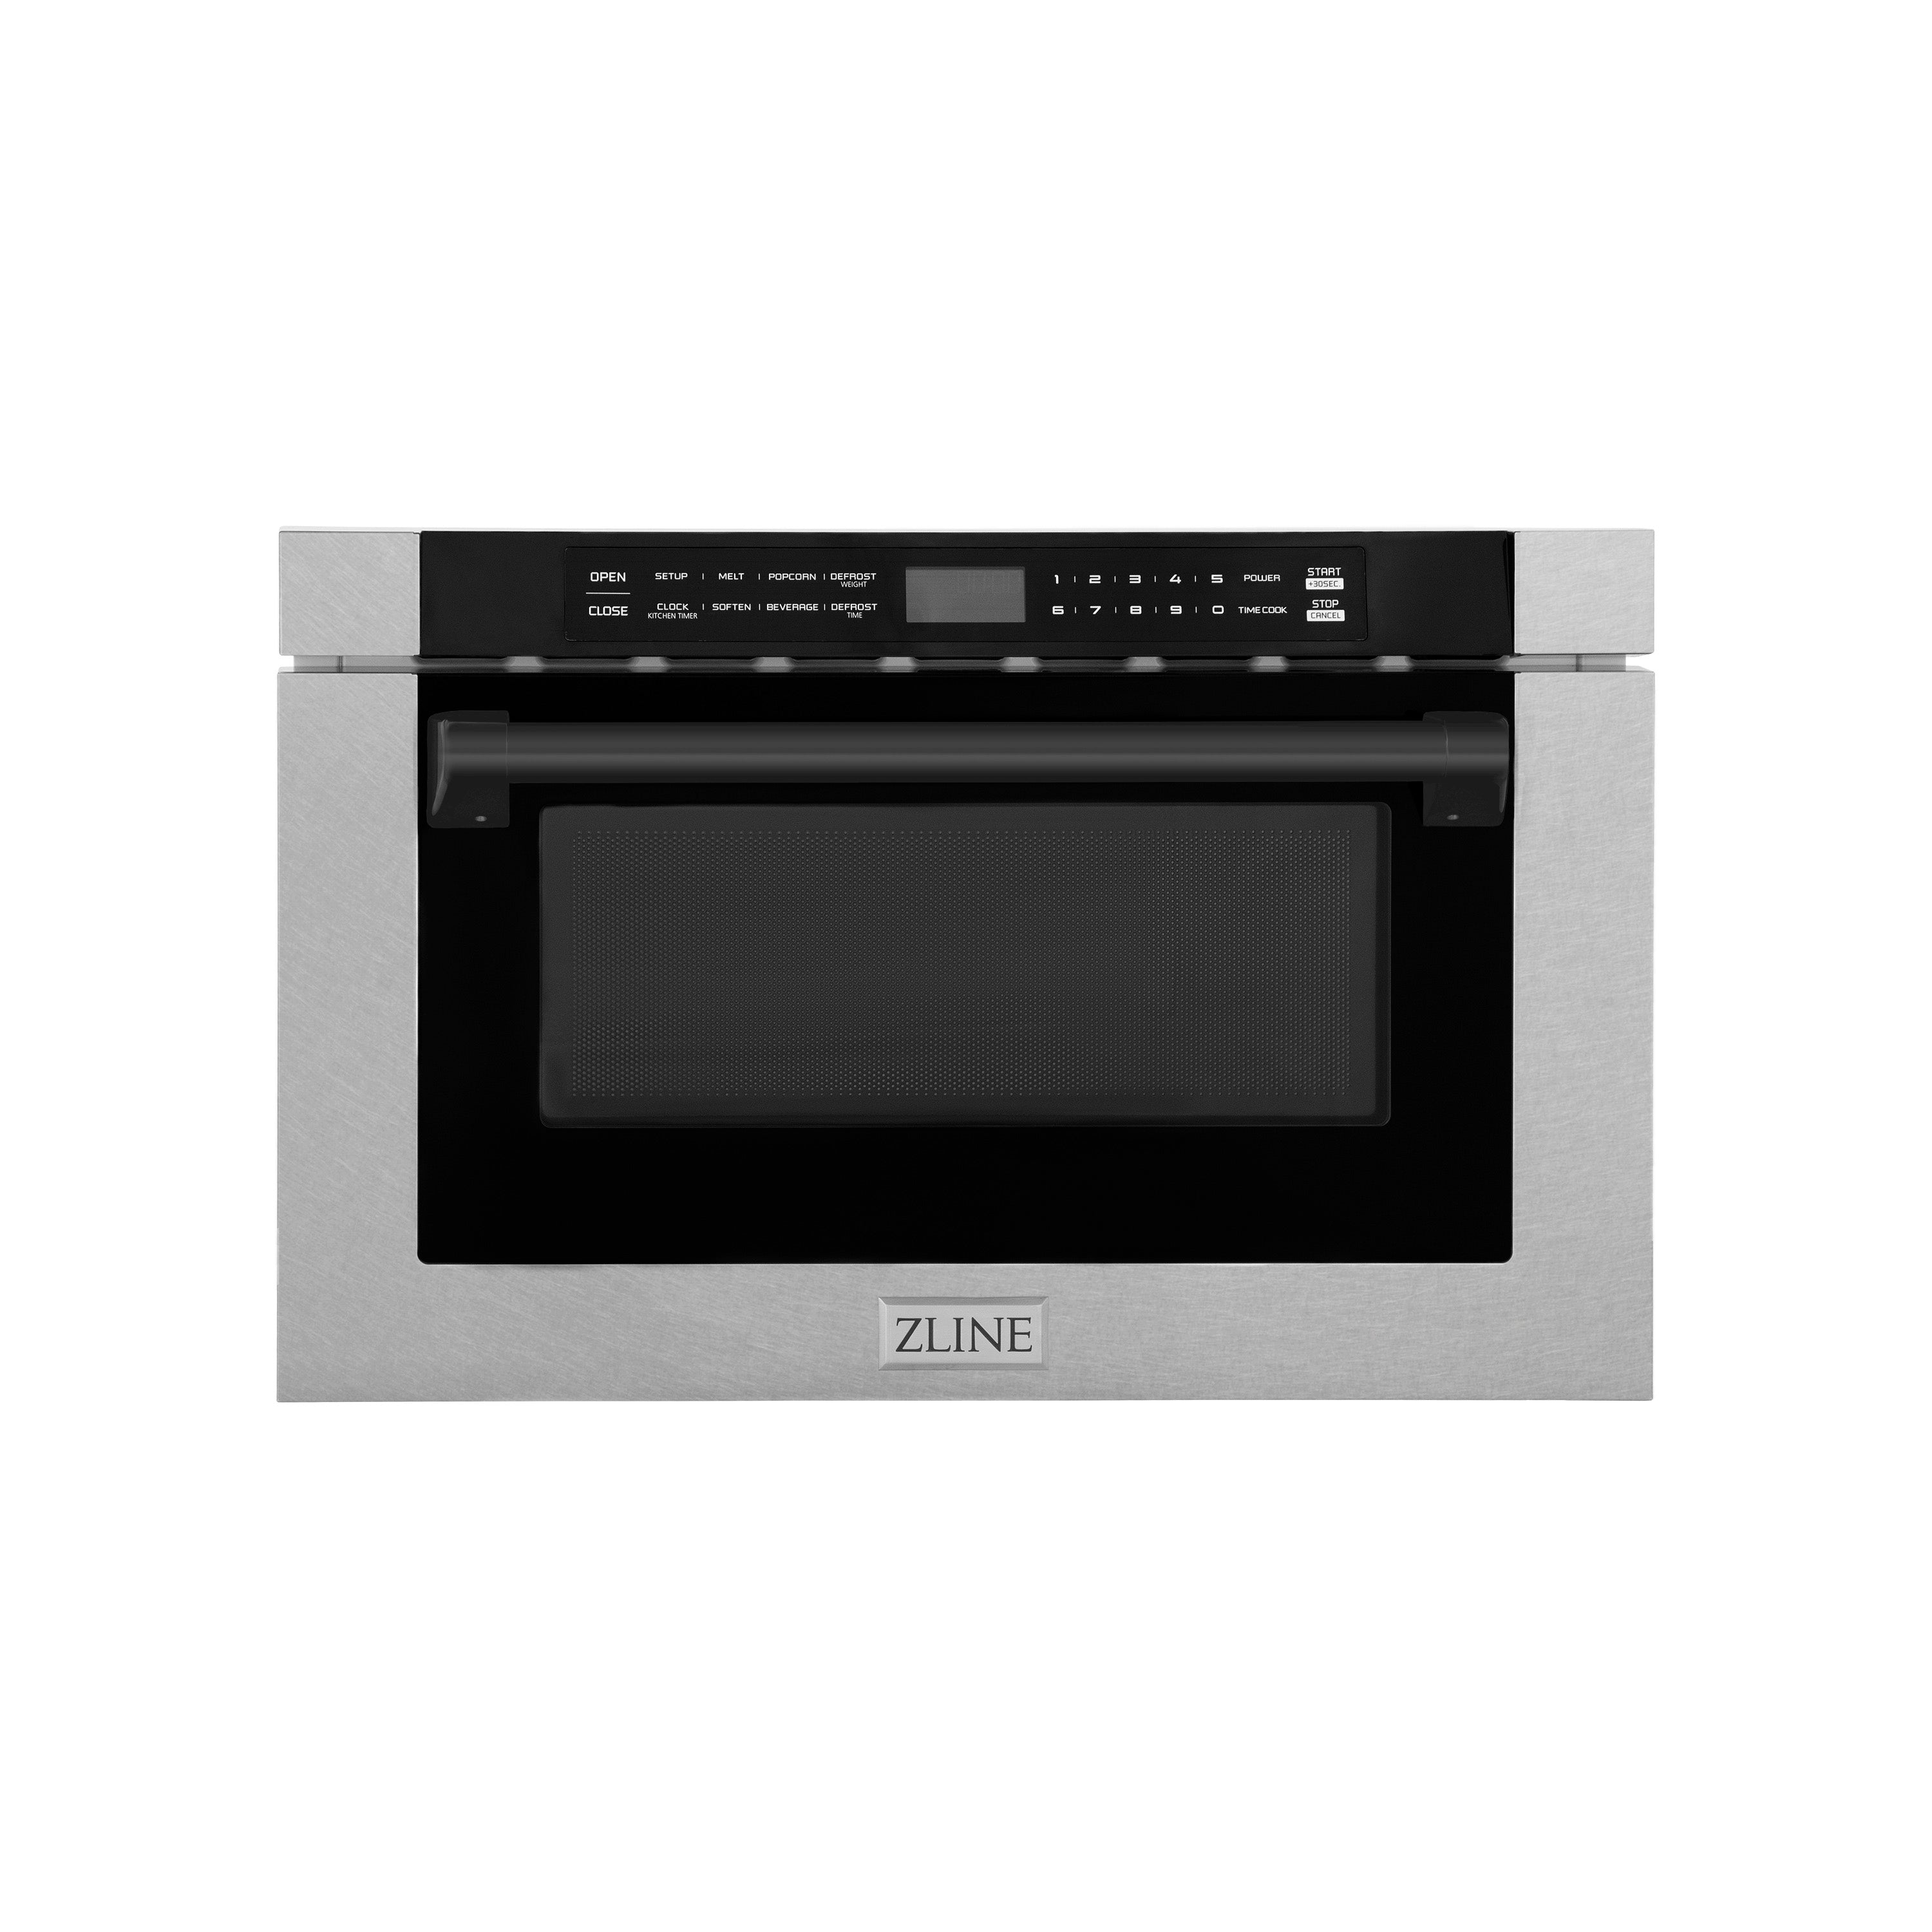 ZLINE Autograph Edition 24 in. Microwave in DuraSnow Stainless Steel with Traditional Handles and Matte Black Accents (MWDZ-1-SS-H-MB) Front View Drawer Closed